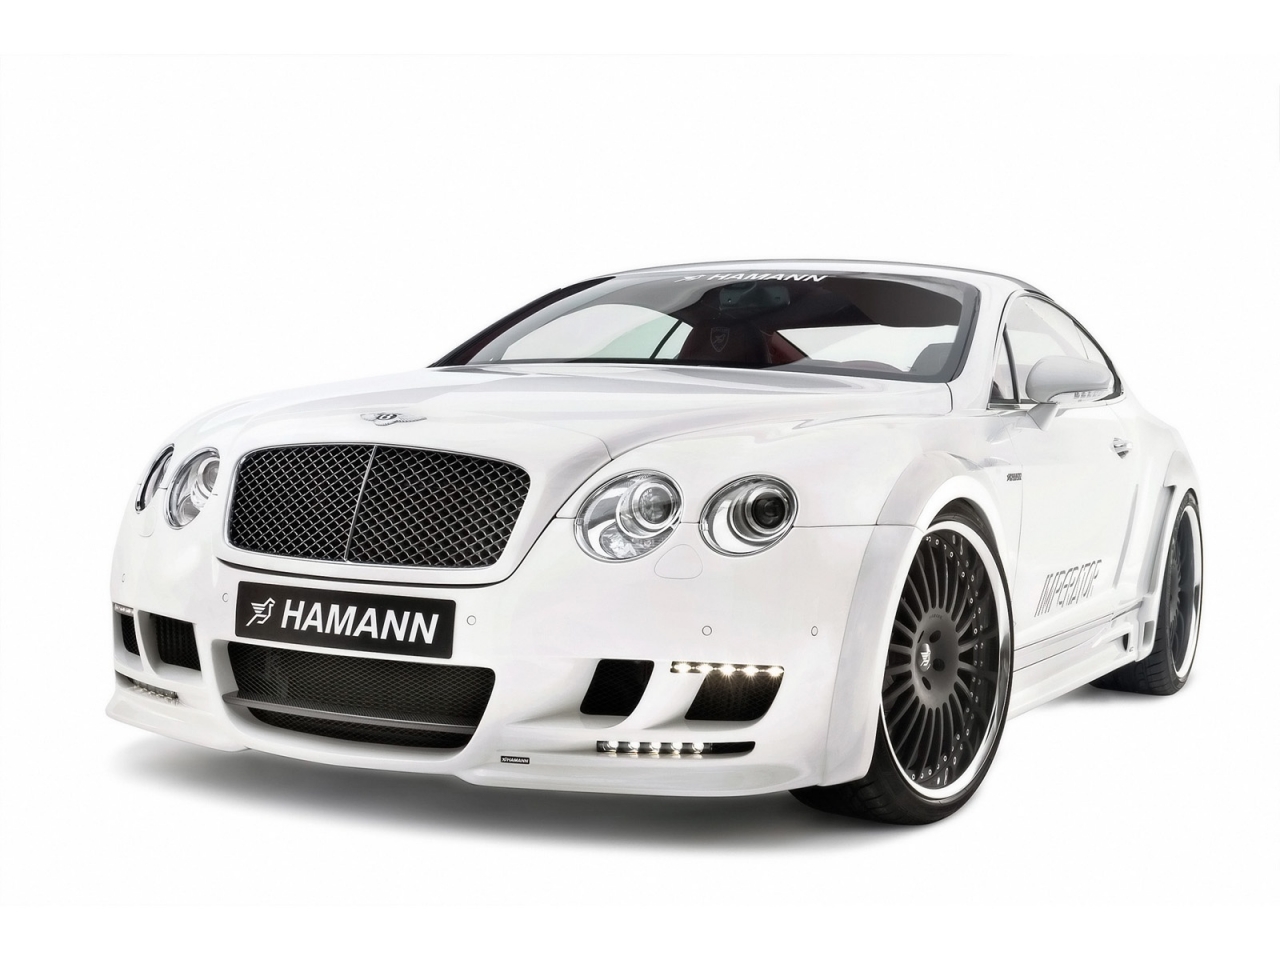 2009 Hamann Imperator based on Bentley Continental GT for 1280 x 960 resolution